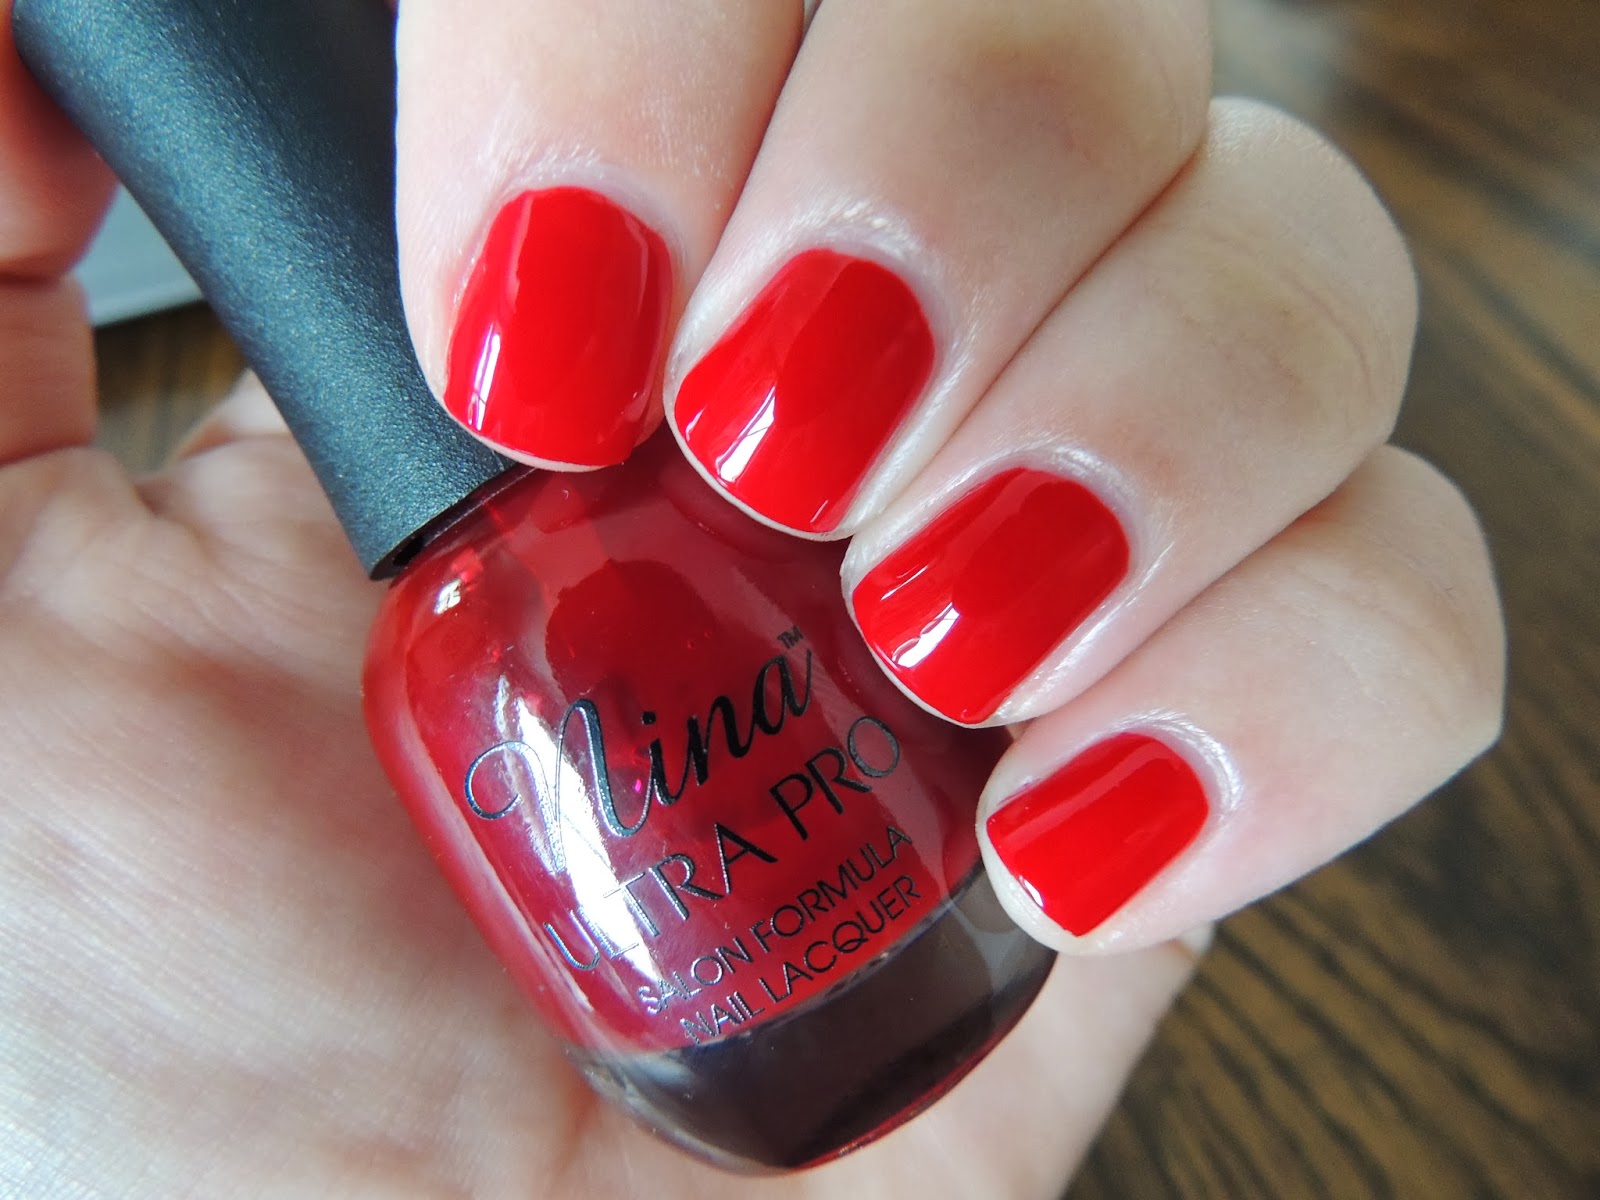 1. "Sultry Red" Nail Polish - wide 3